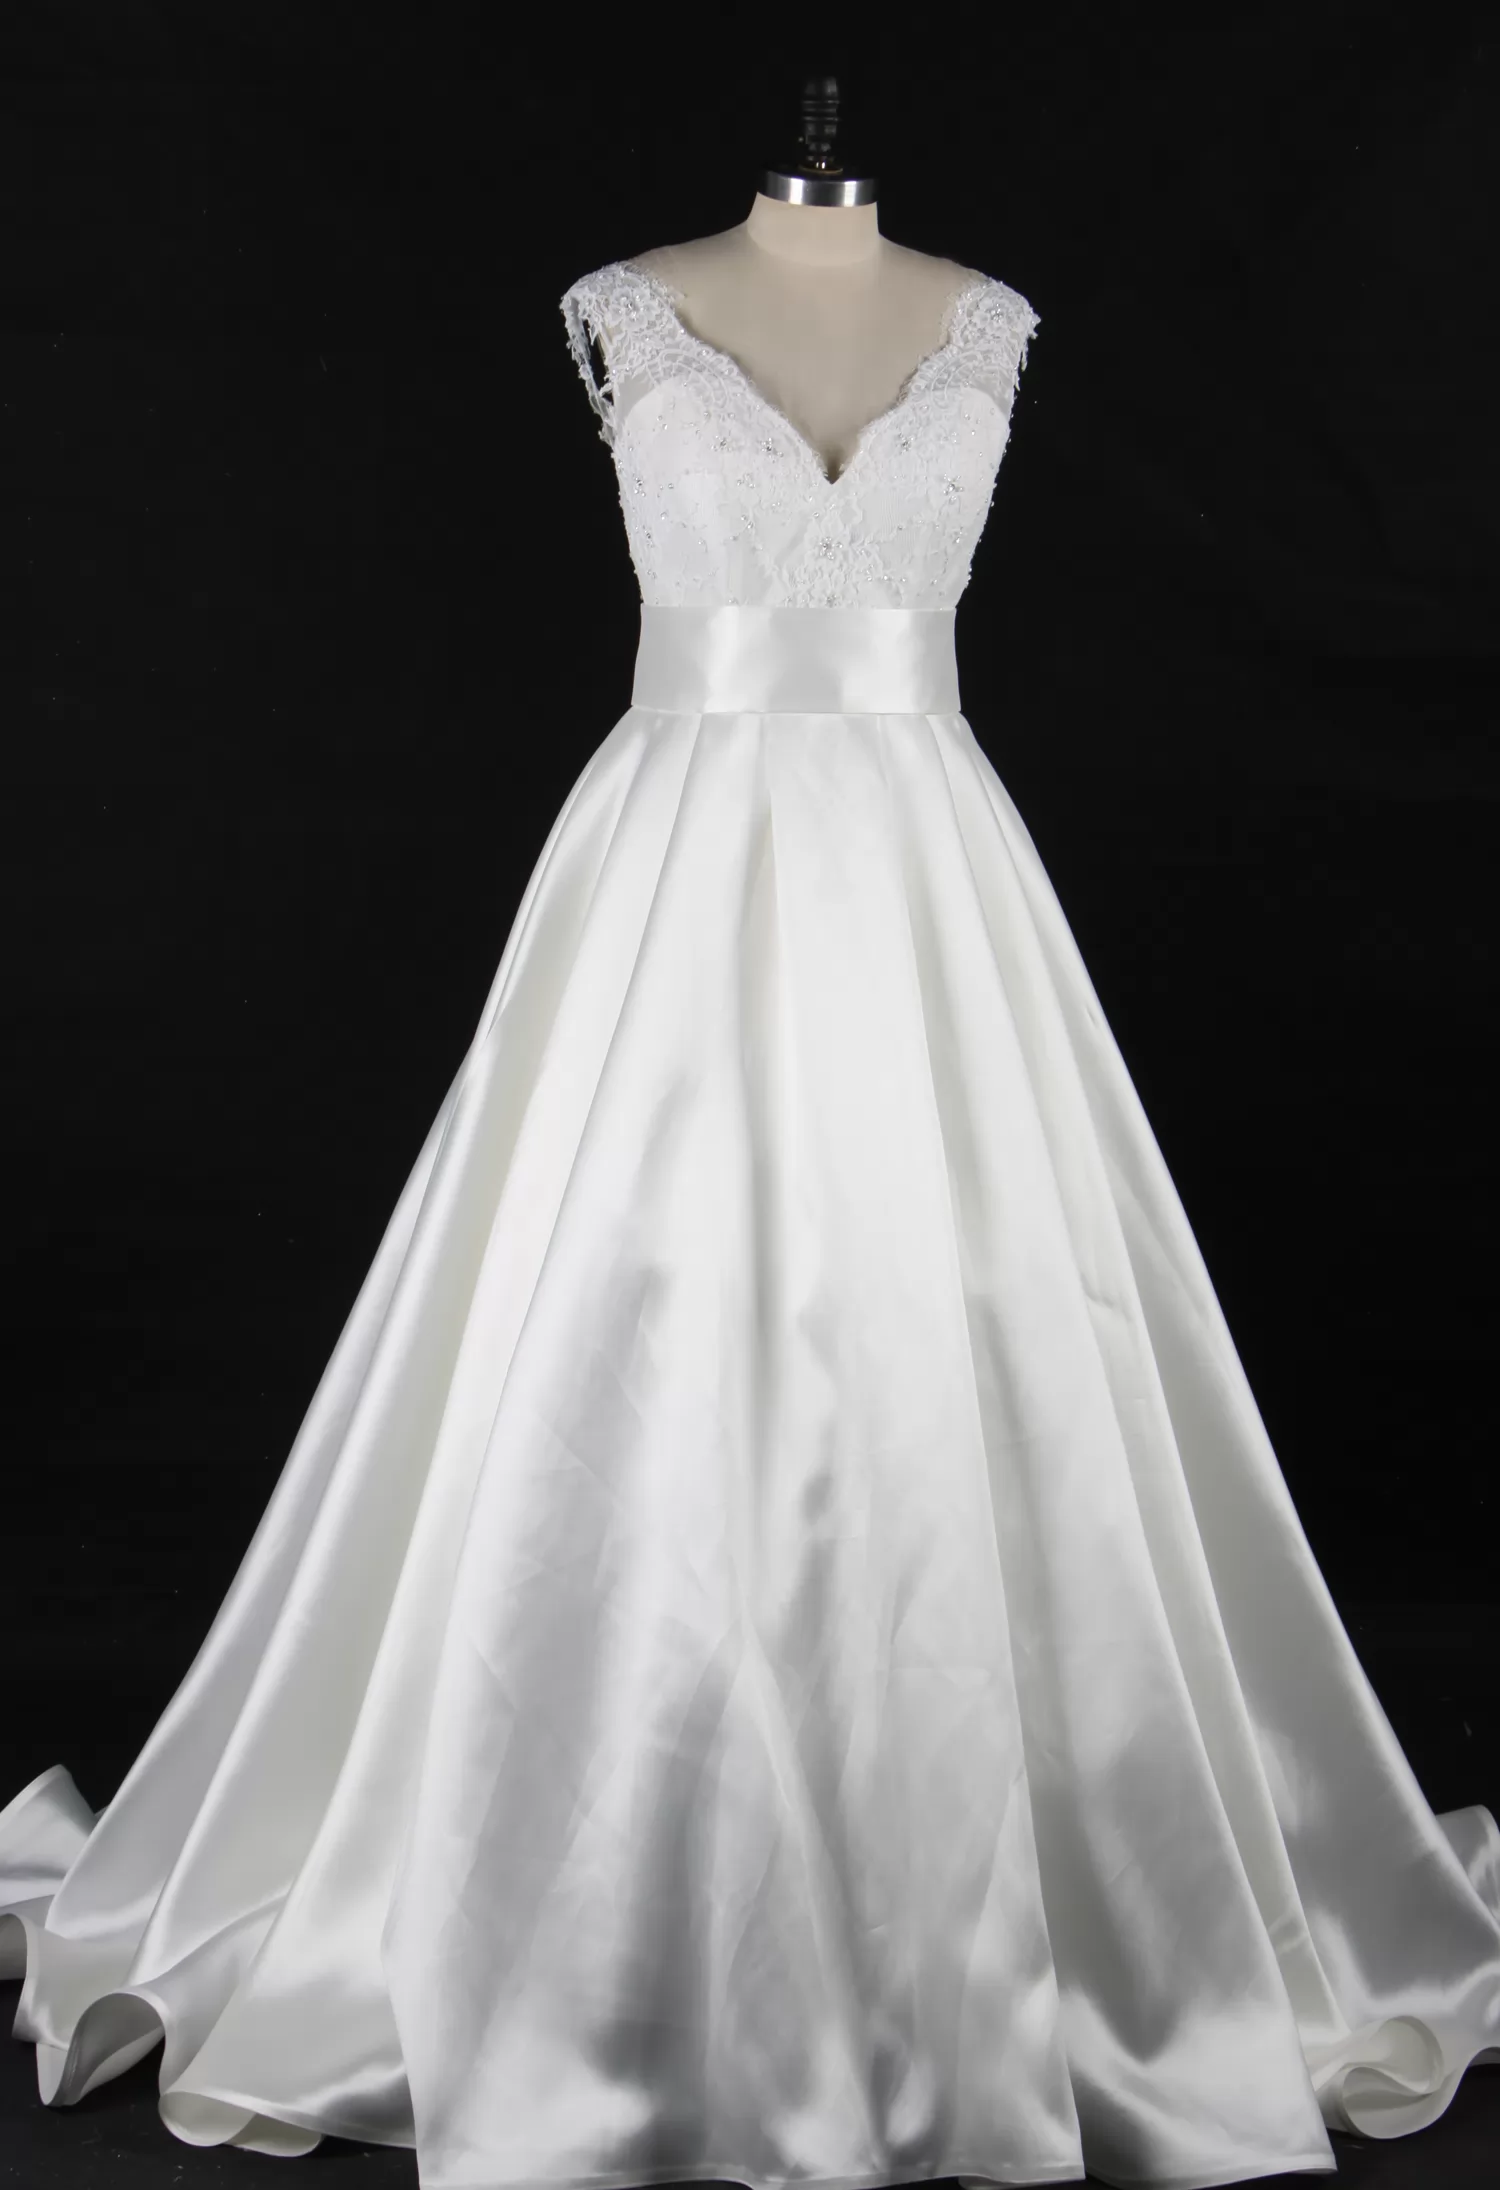 Satin Princess Wedding Gown With A Lovely Lace Bodice